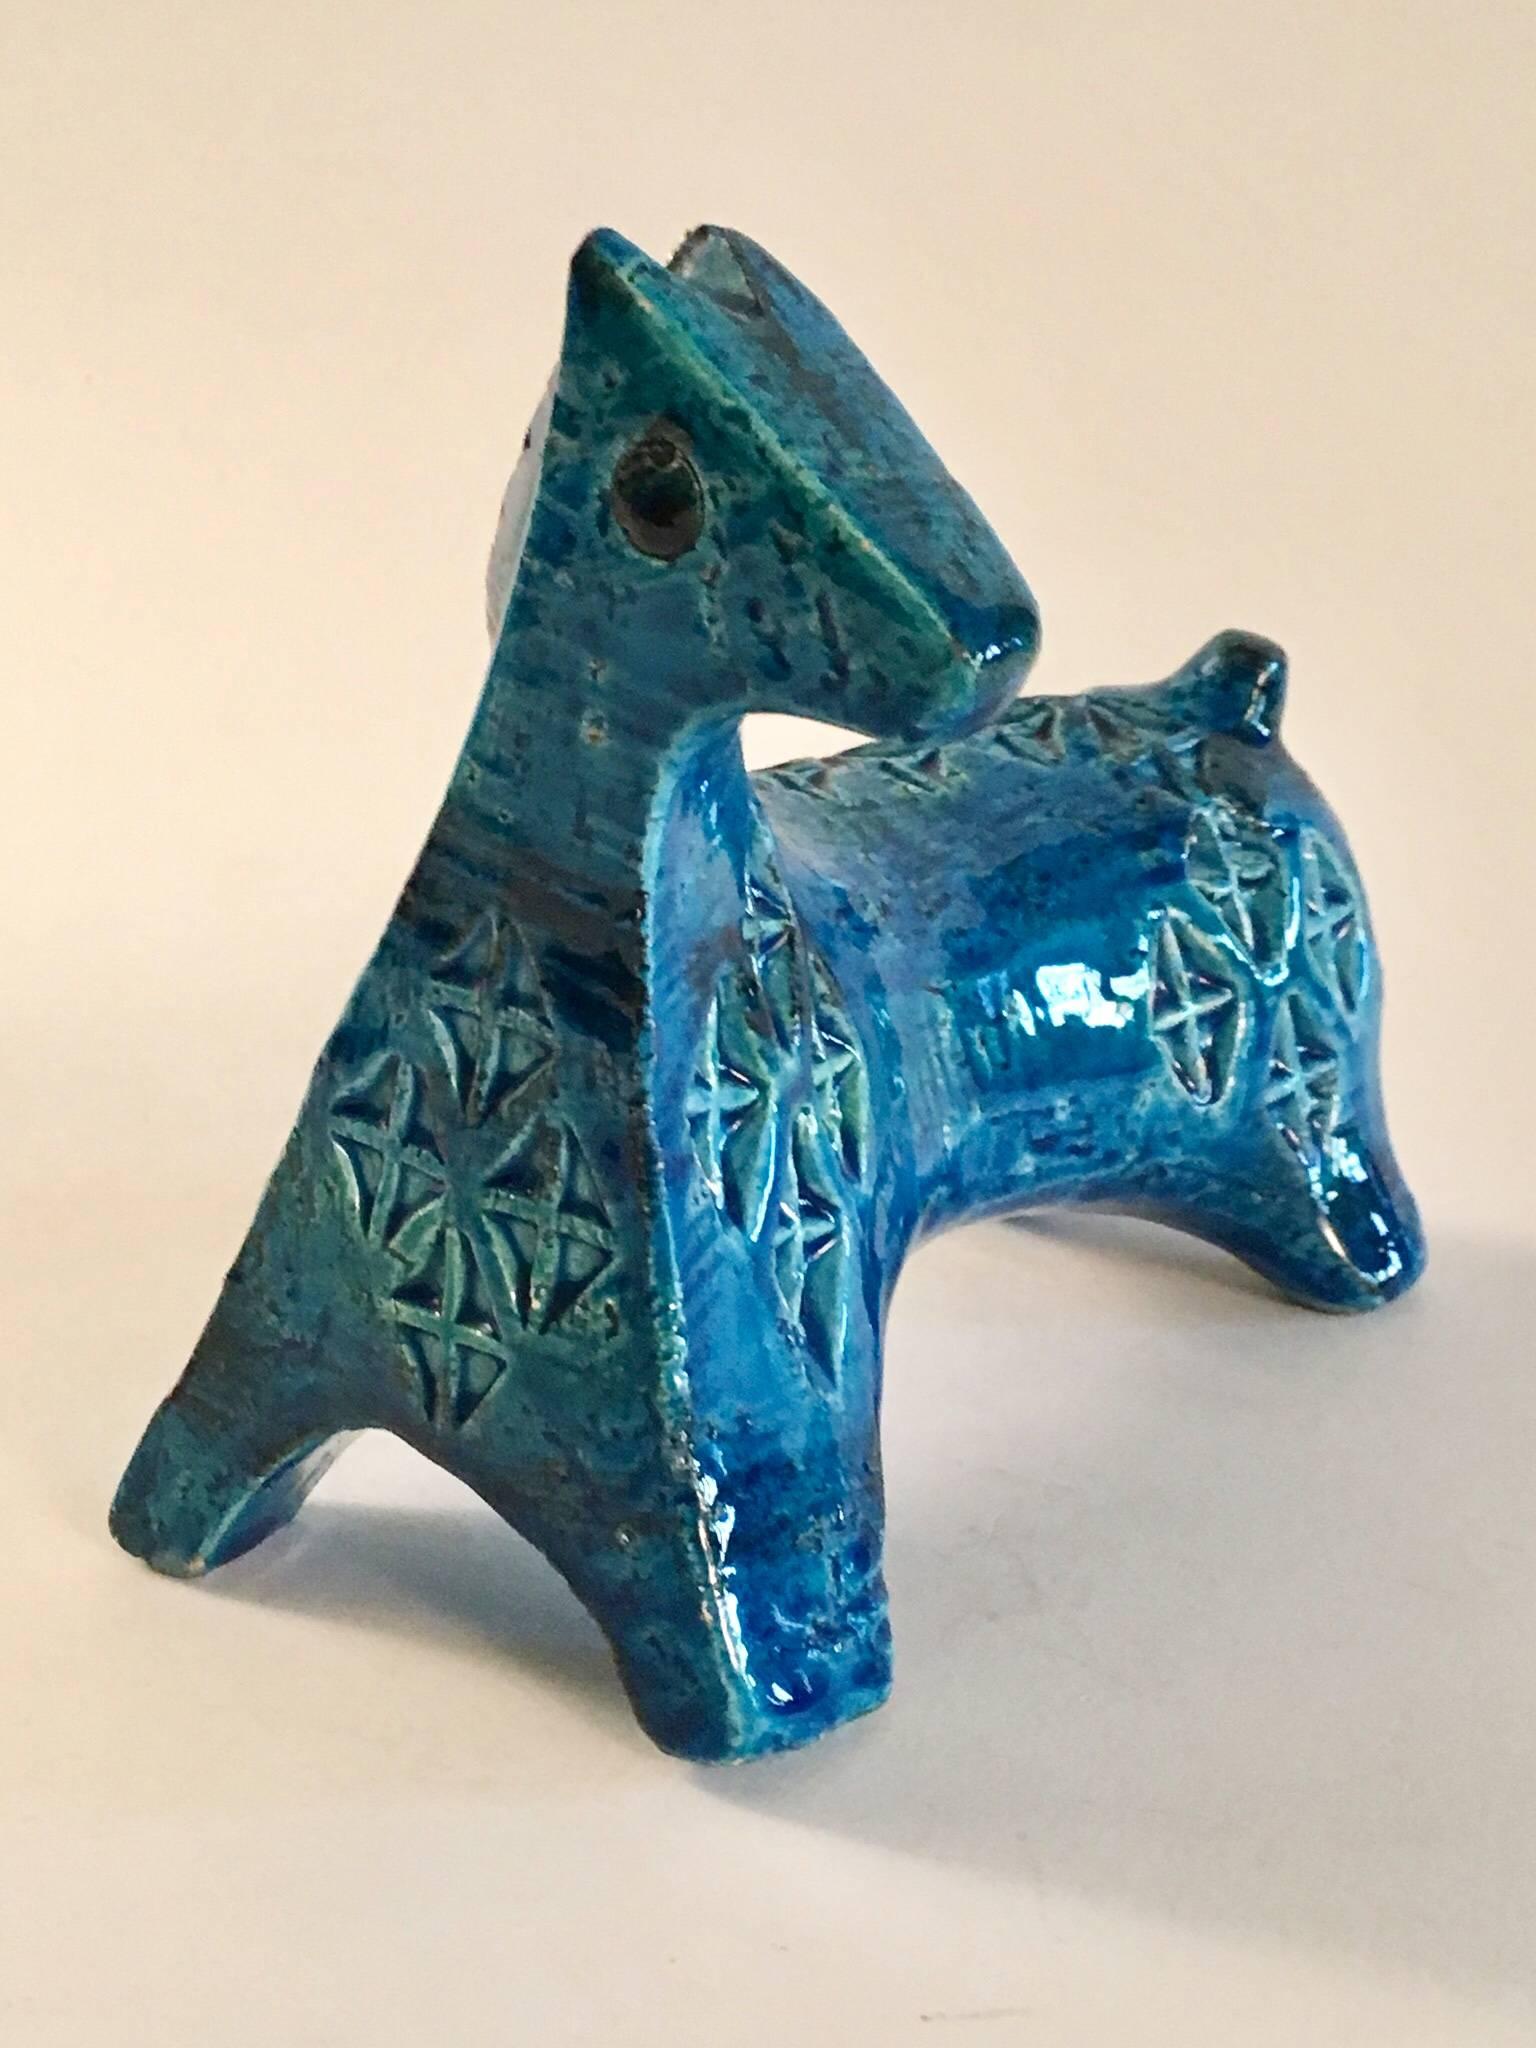 Aldo Londi for Bitossi stylised small horse in 'Rimini Blu' pattern and glaze. A fine example with lovely graduated colors.